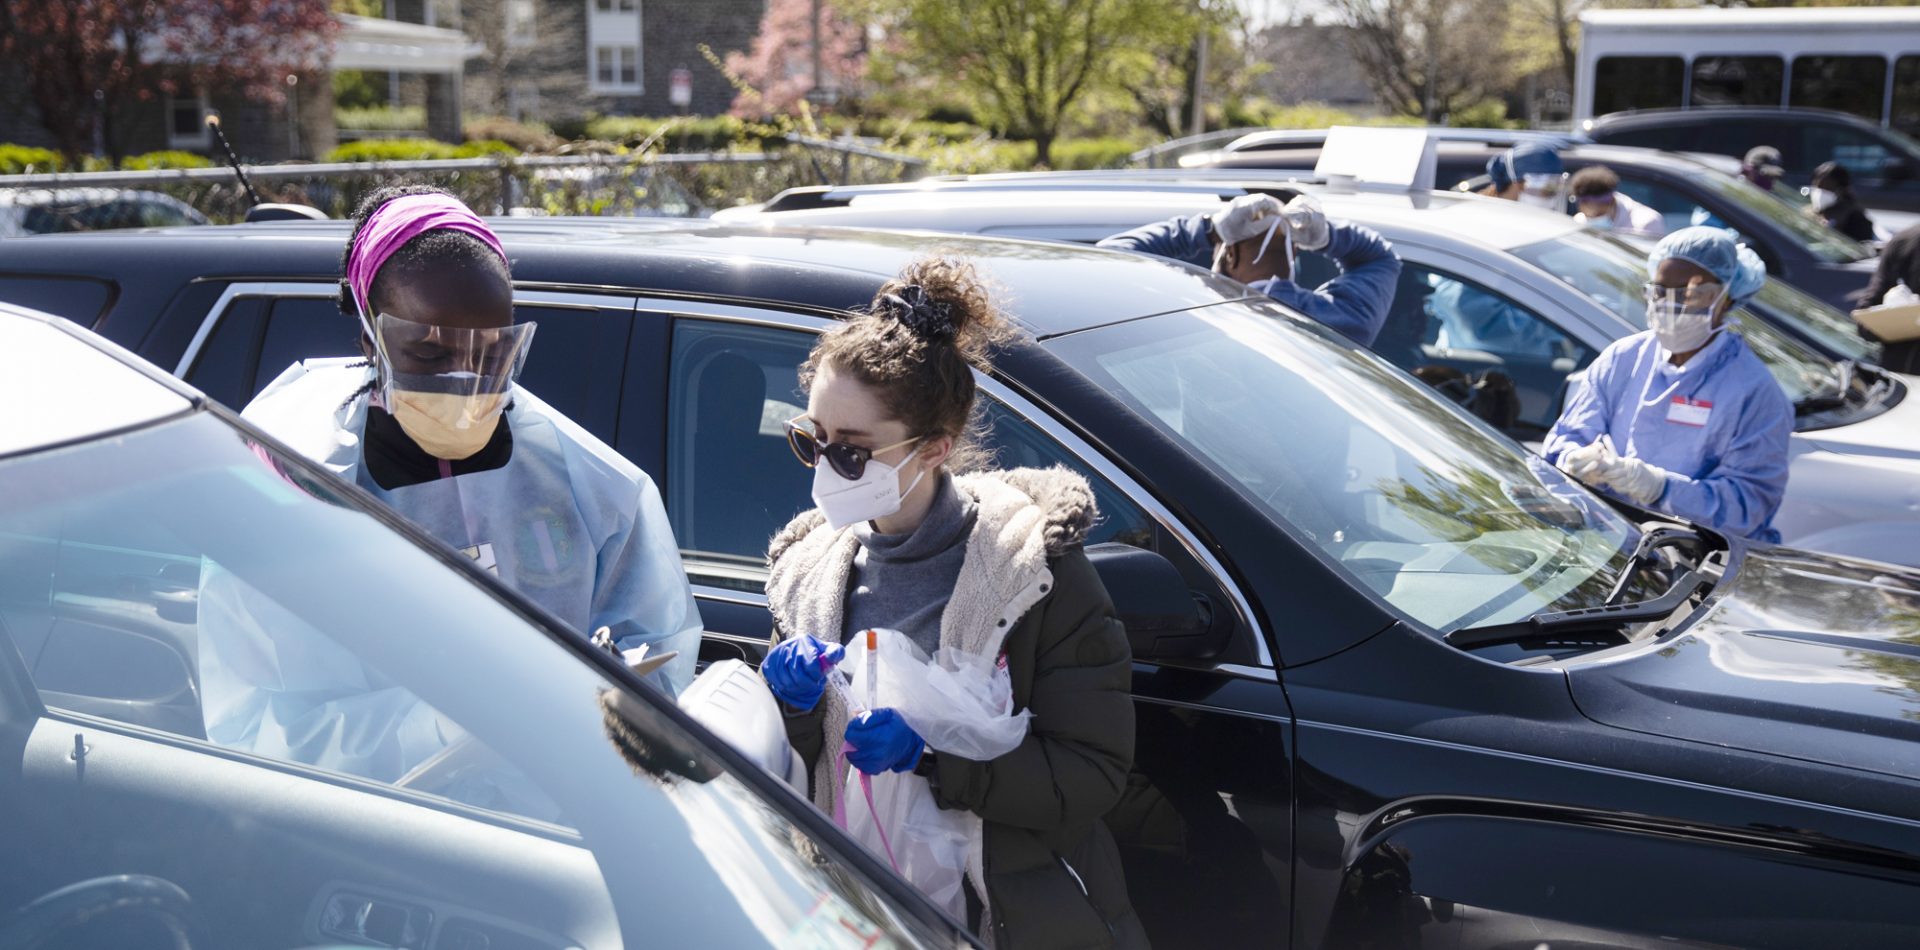 Stanford, left, assisted by medical student Tal Lee, prepares to administer a coronavirus swab test on a person in the parking lot of Pinn Memorial Baptist Church in Philadelphia on April 22.